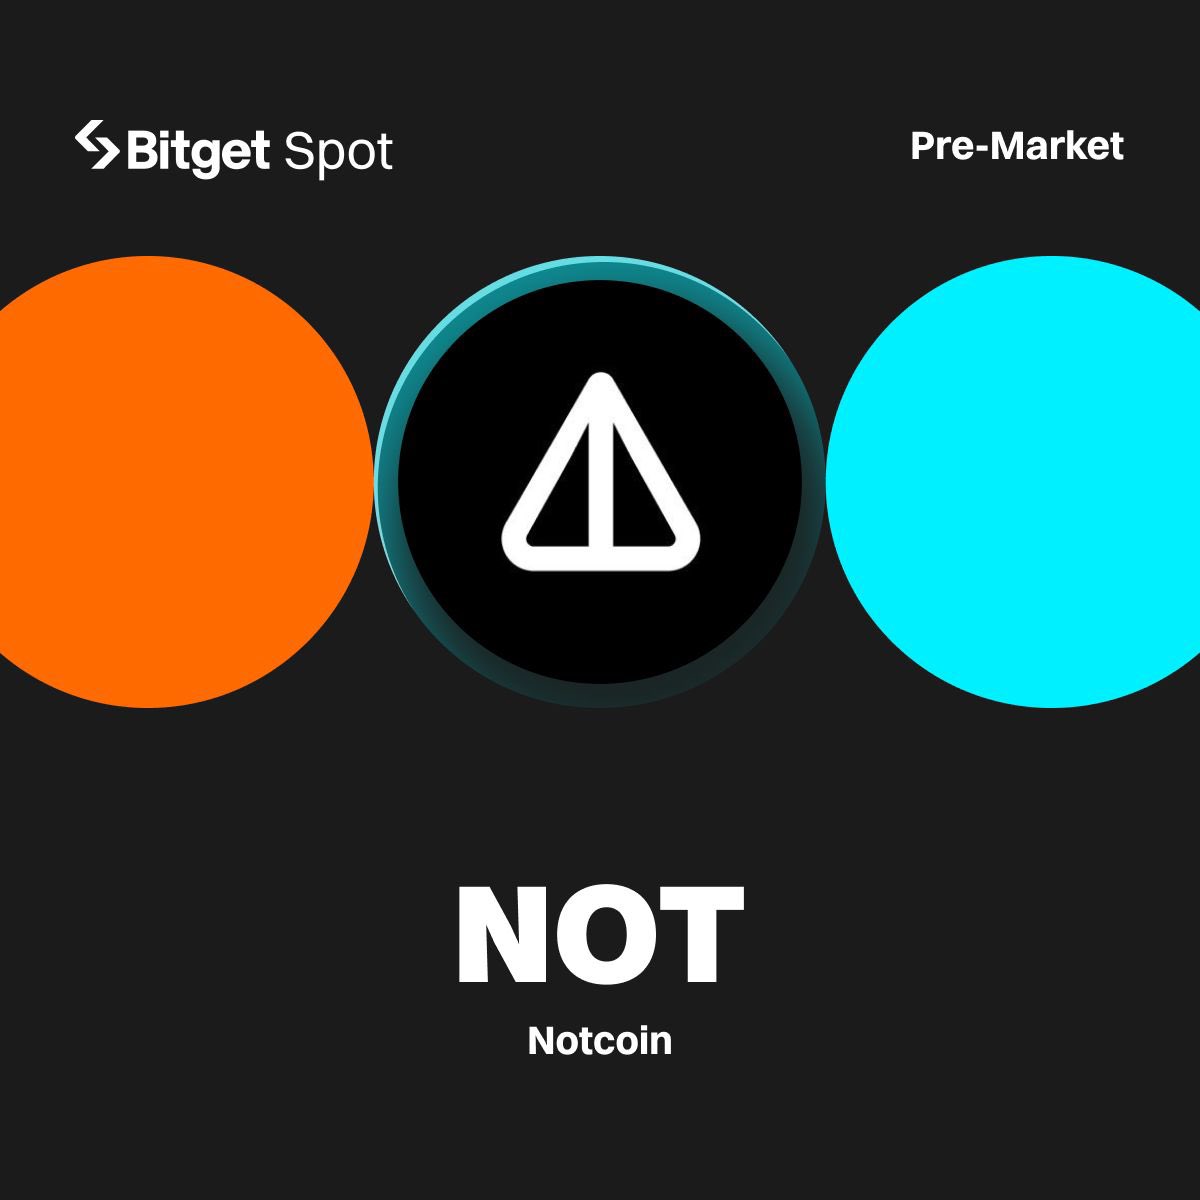 (Notcoin) NOT 🚀🚀 Bitget is listing NOT for trading & you can trade NOT before it is listed on Spot. Heard of Bitget Premarket? it’s a trading market place where you can buy coins before they PoP. Don’t miss out 🚨 Click NOW to open a Bitget account; partner.bitget.site/bg/KS9TF4